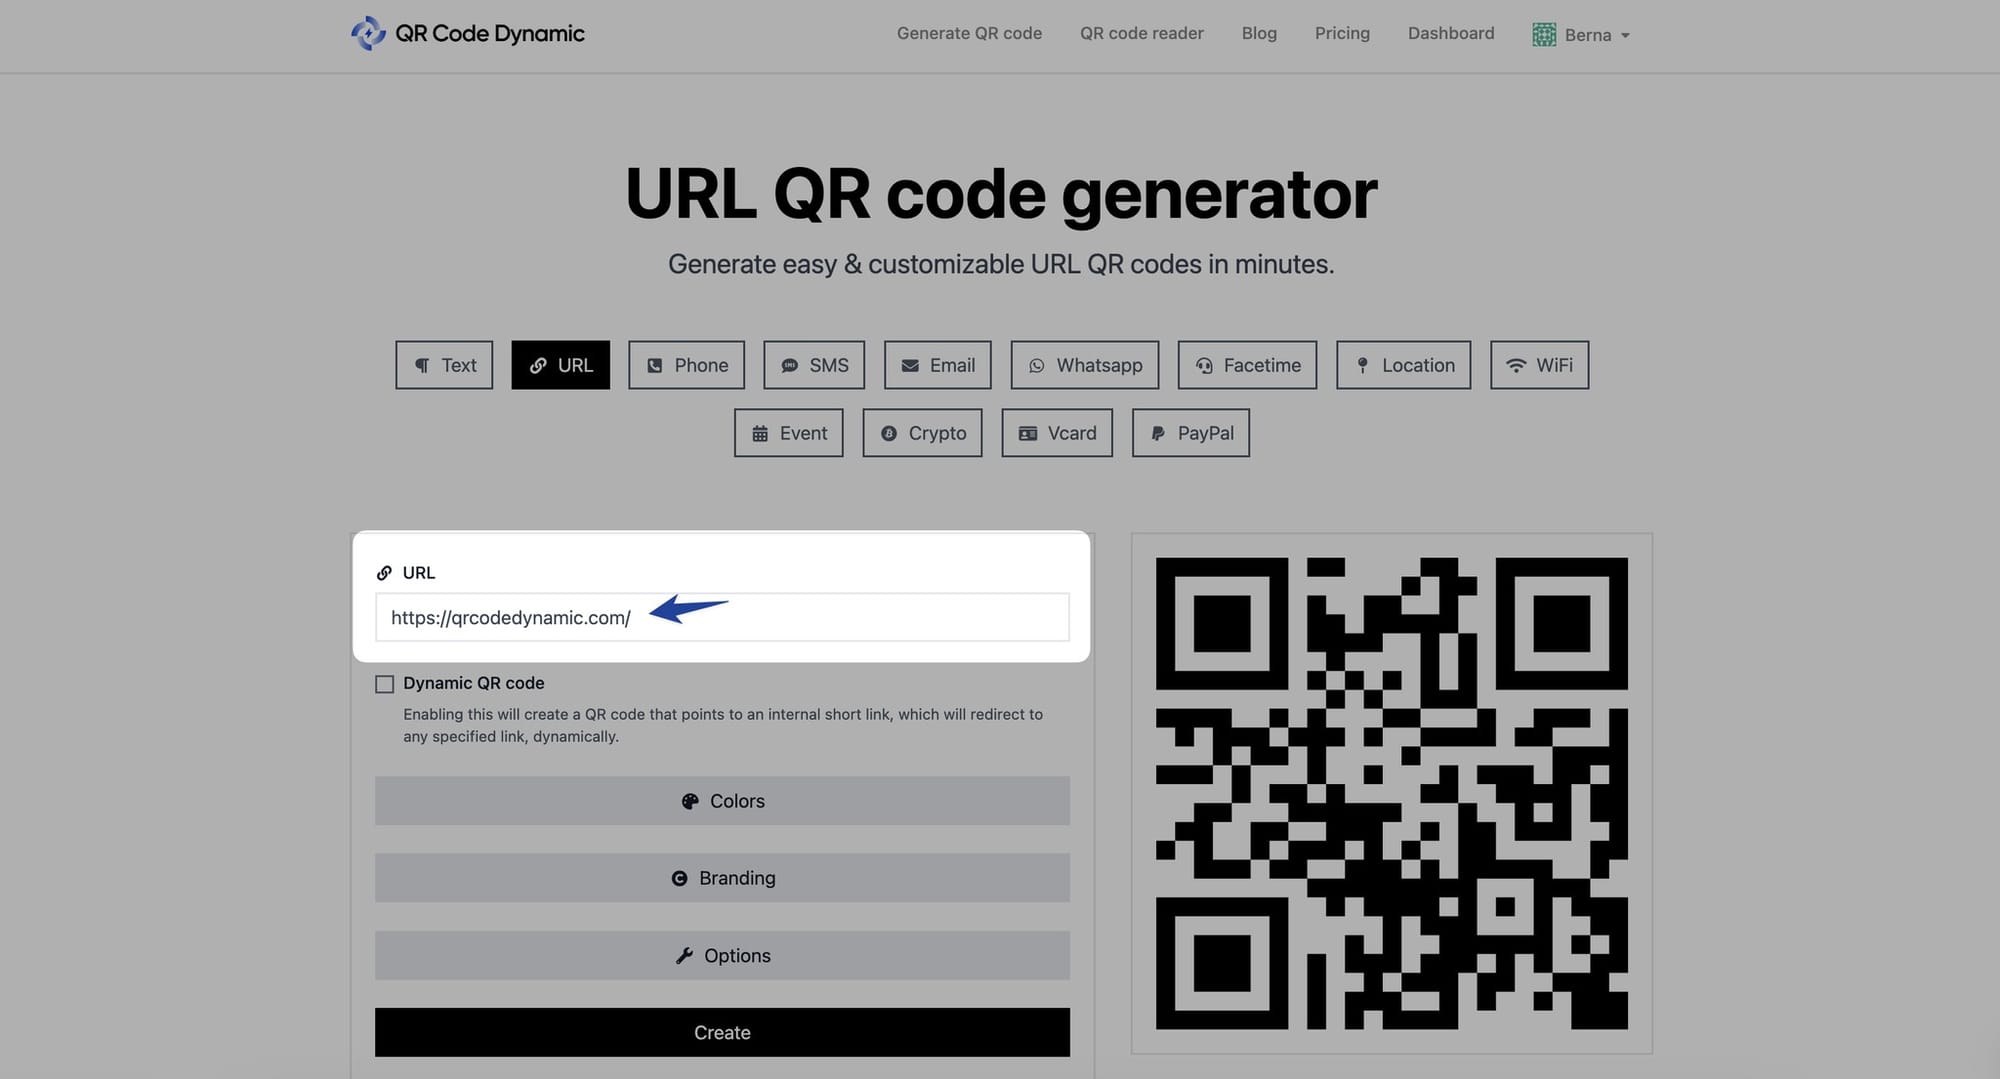 Enter the information into the QR code